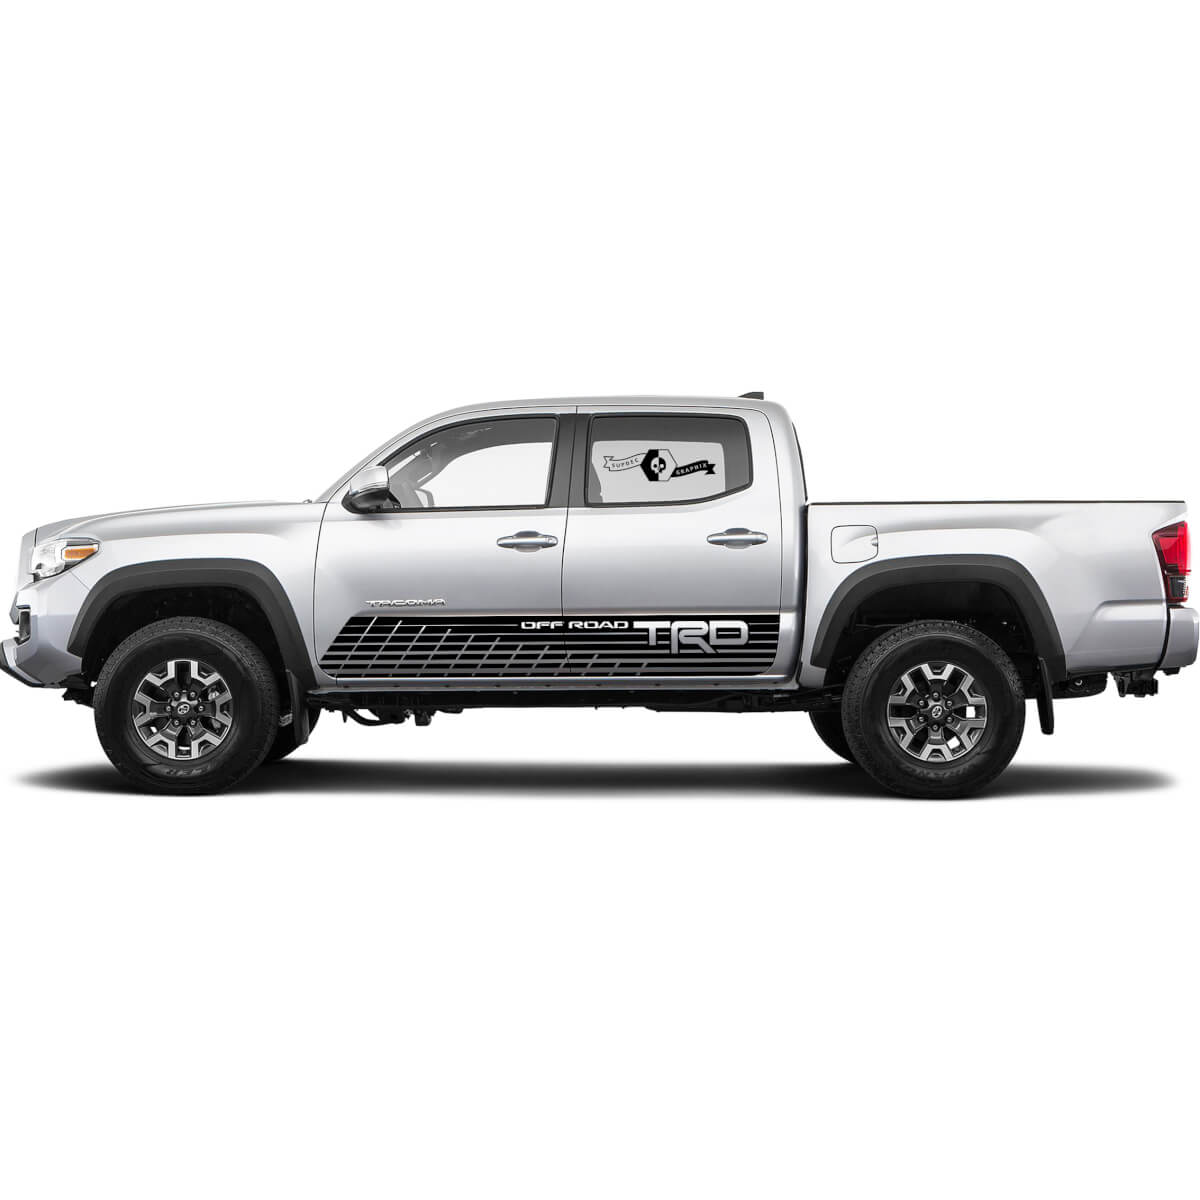 2X Toyota Tacoma TRD Off Road 2021 side Striped Vinyl Decals Rocker Panel Graphics Rally Sticker